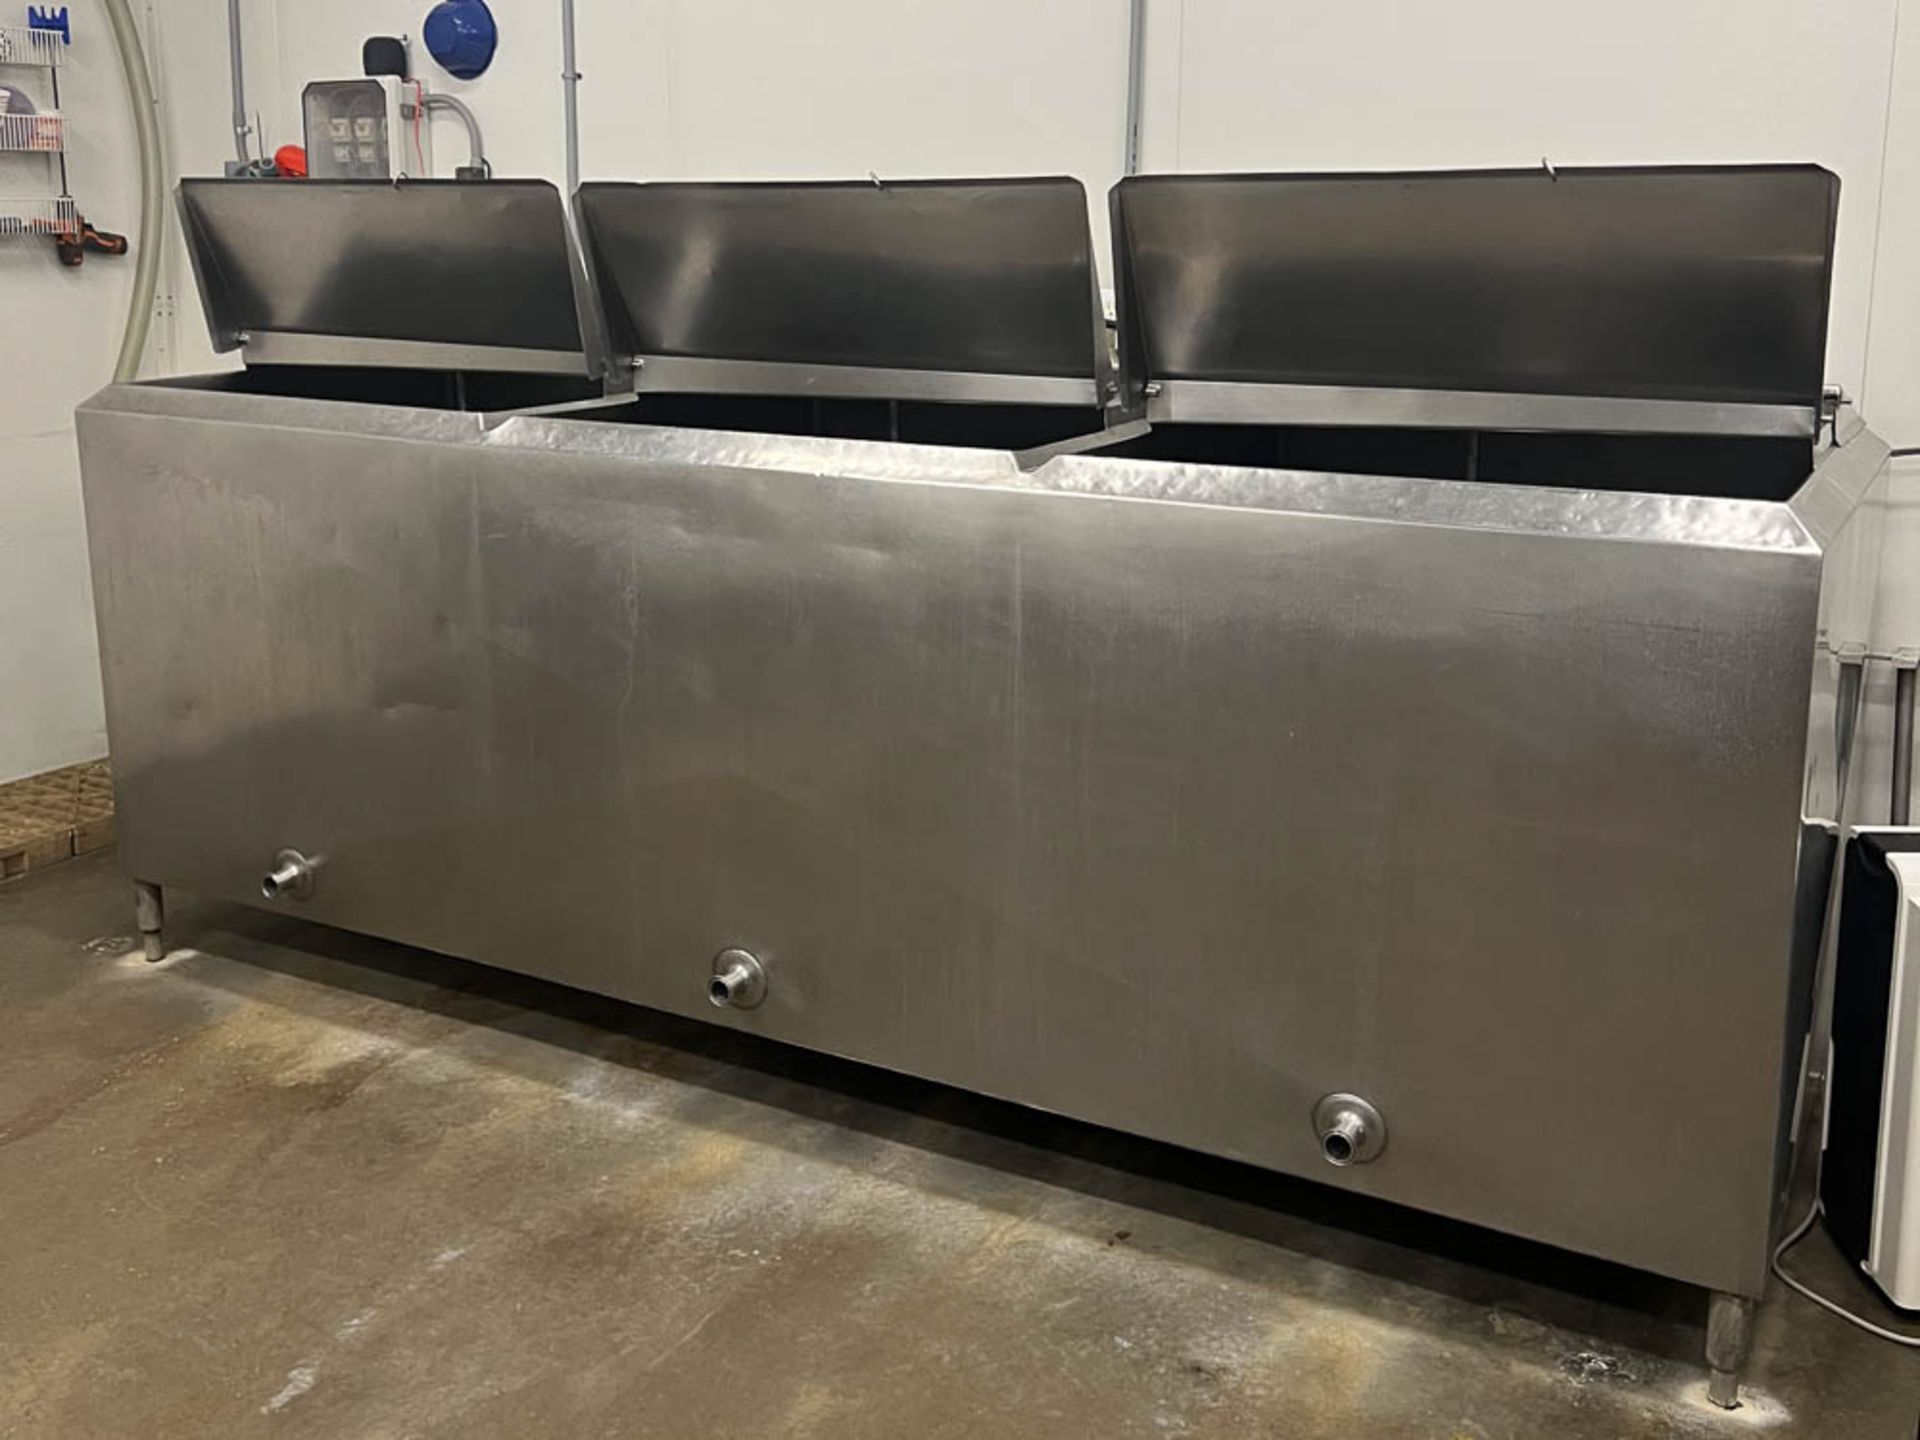 120 Gallons x 3 Compartment Flavor Tank: 10’ Length x 3’ Width x 5’ Height - Rigging Fee: $750